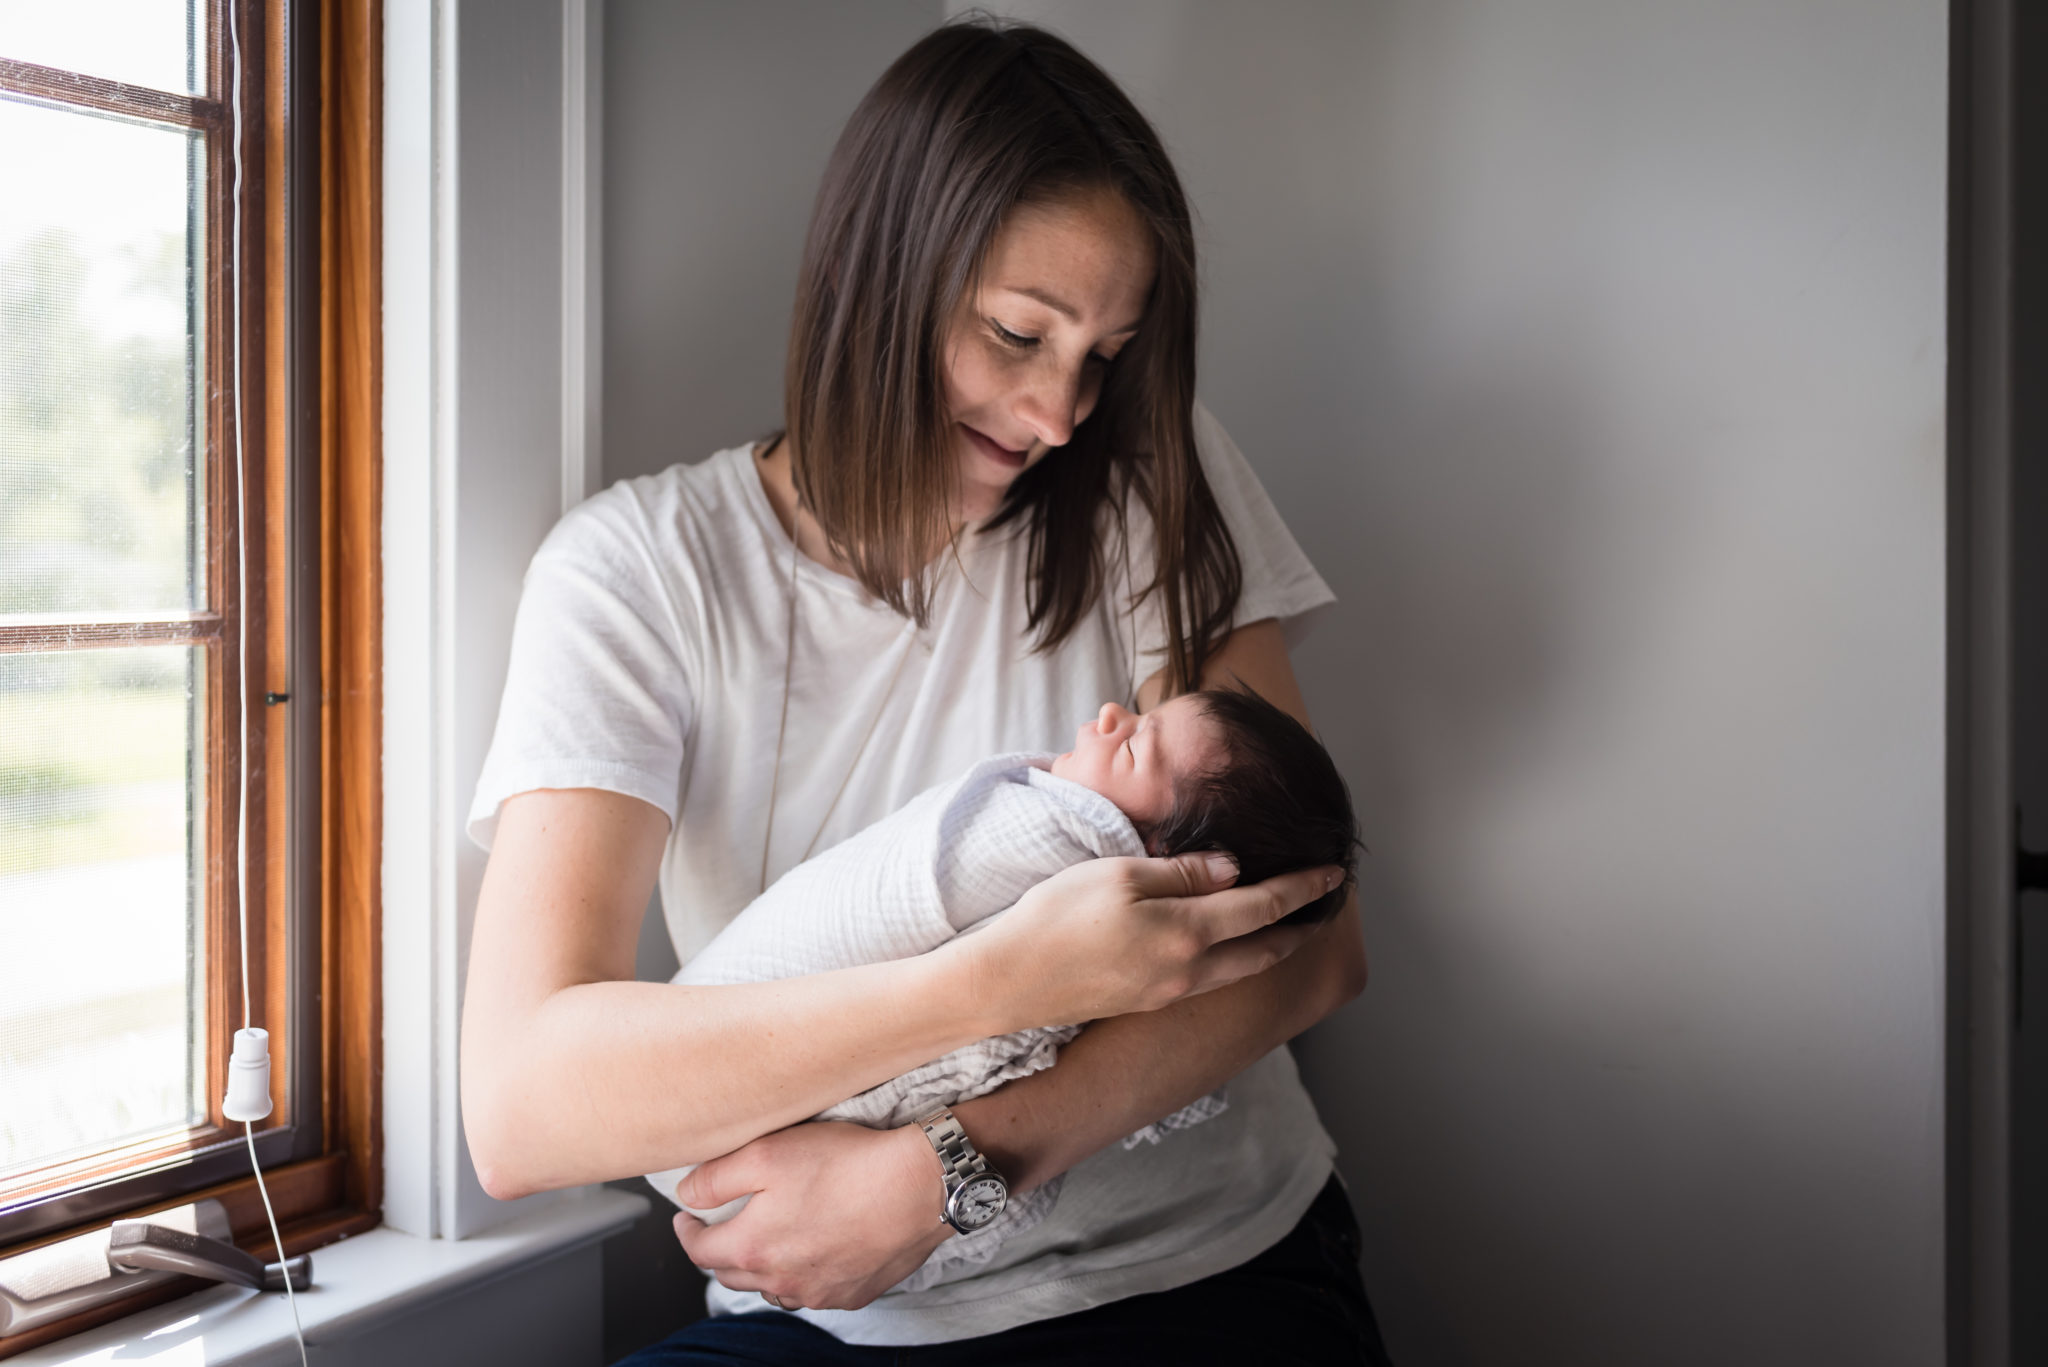 Mom with shoulder lengthy brown hair holding newborn in white wrap by a window